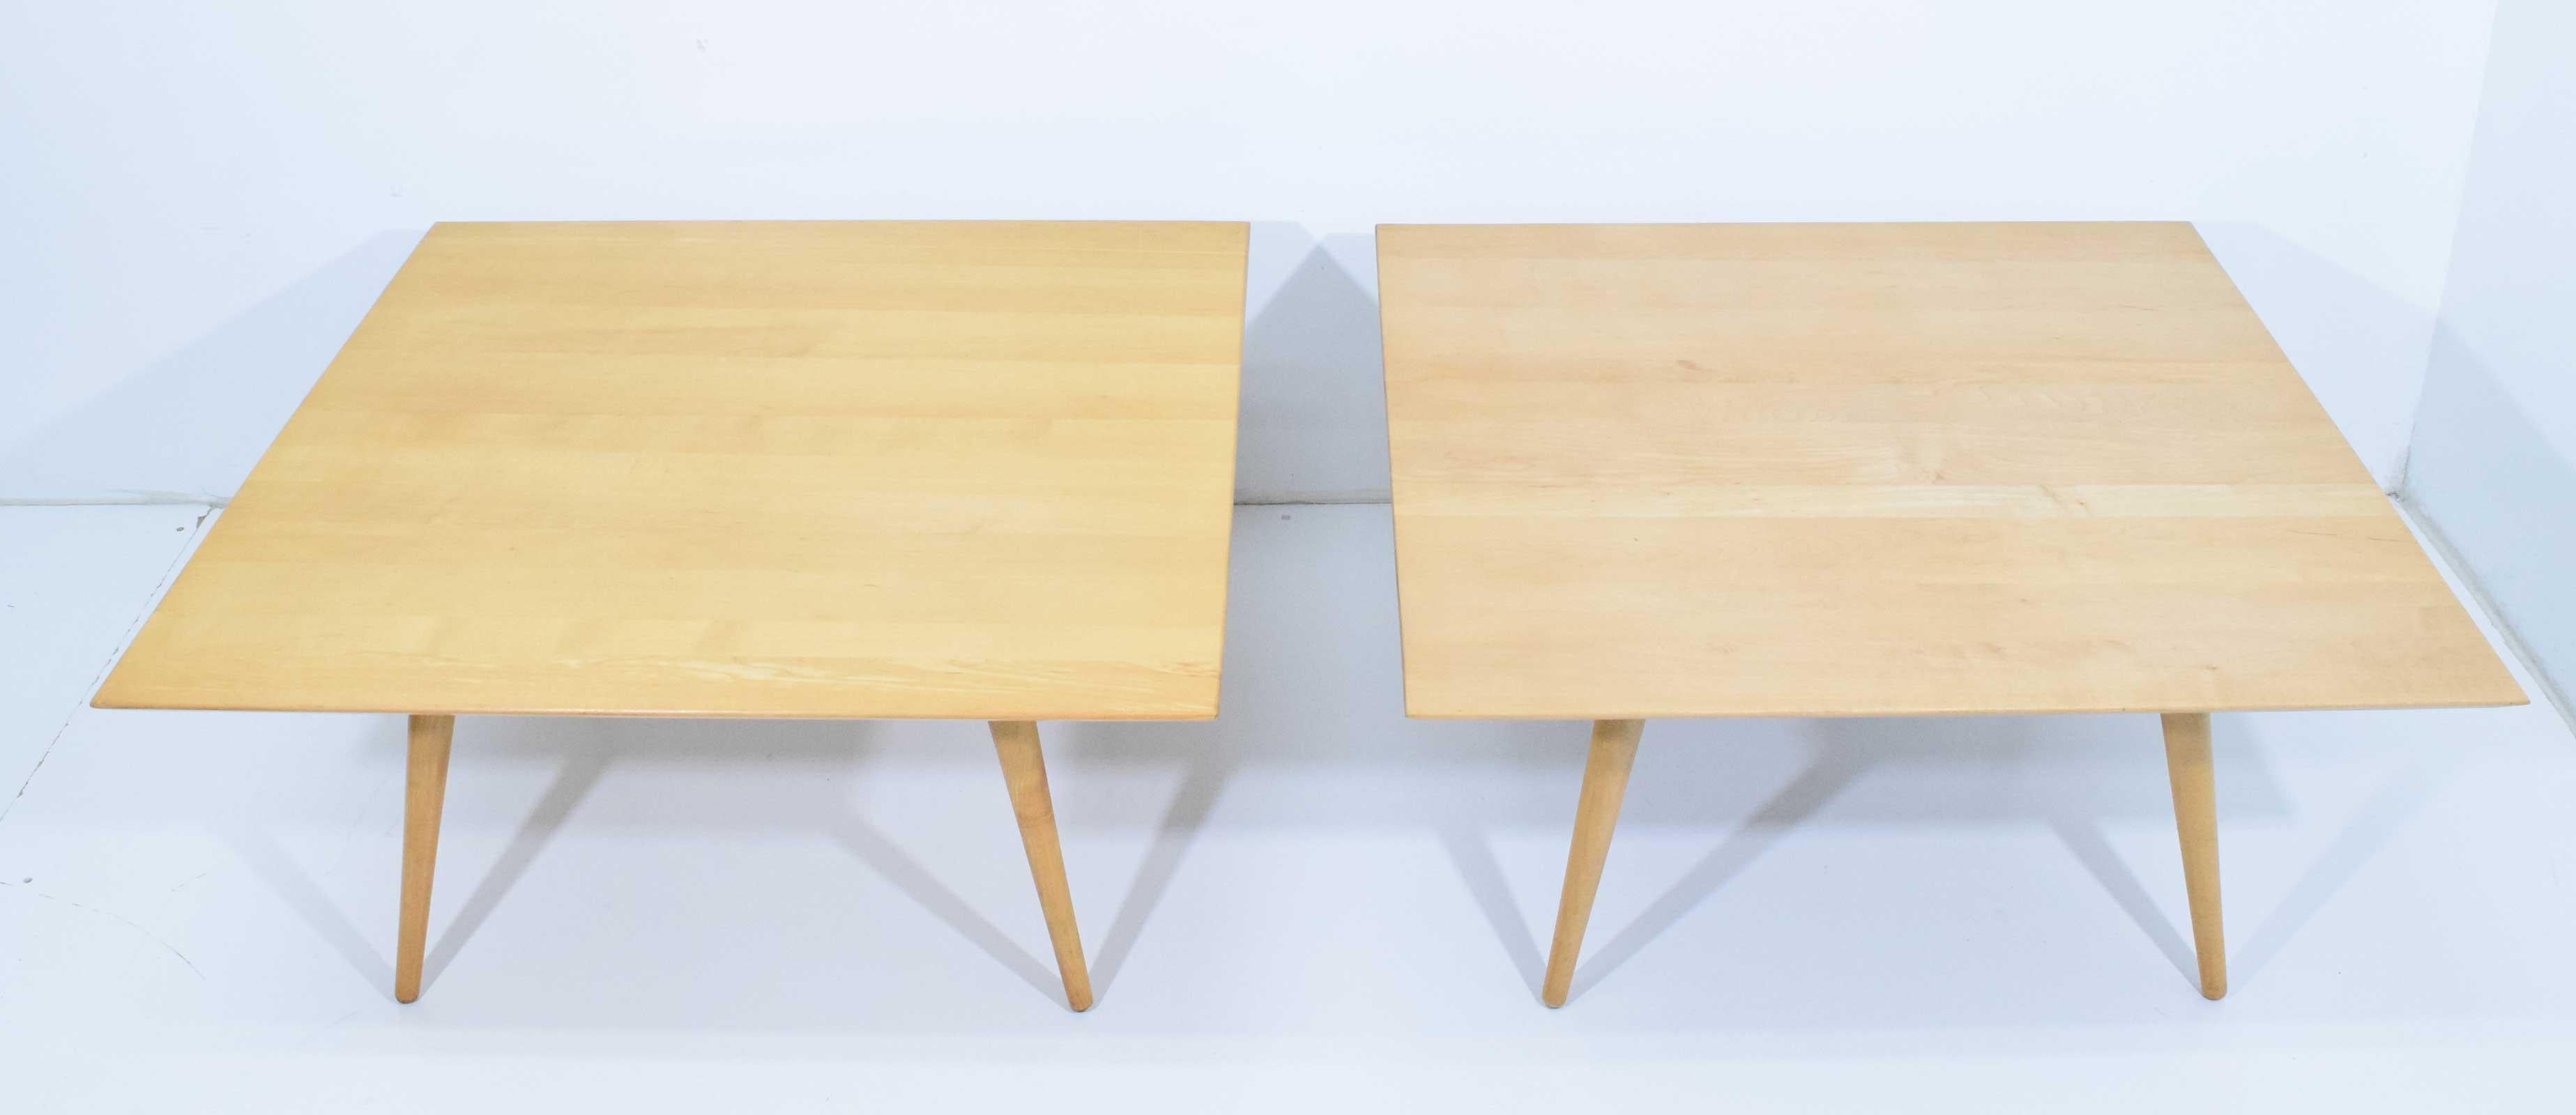 We can sell individually. Pair of tables in maple by Paul McCobb. Solid maple top with conical legs.